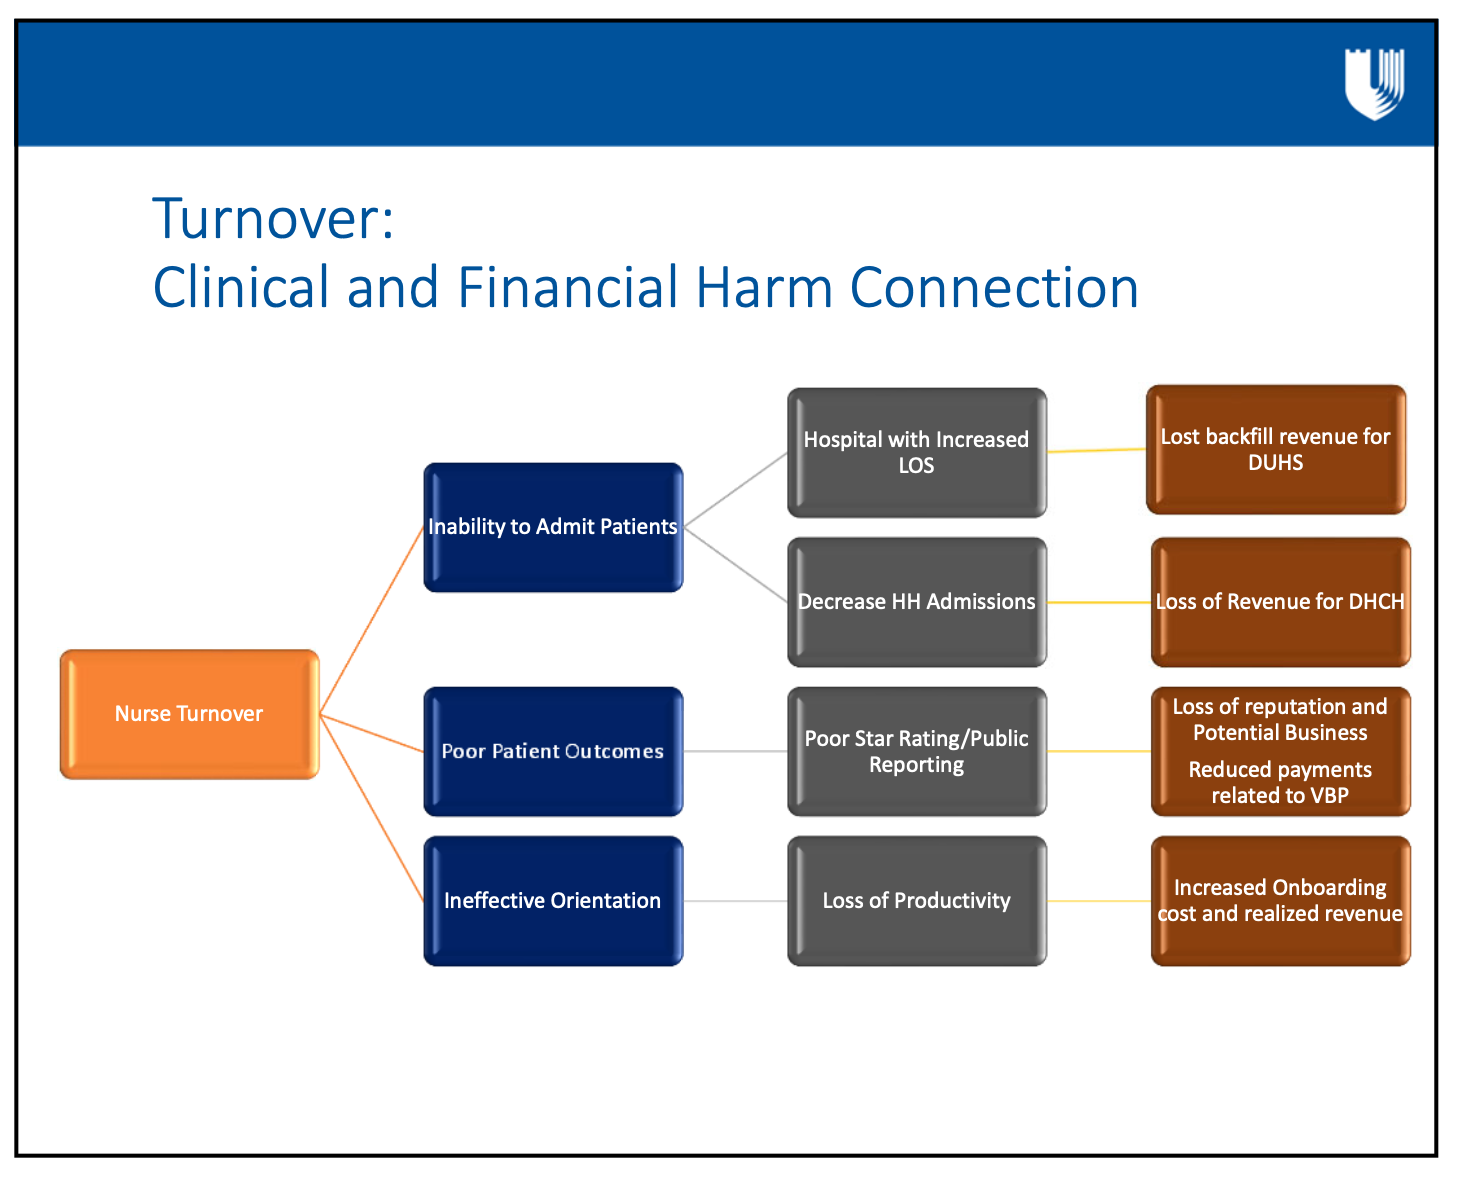 turnover clinical and financial harm connection - duke health